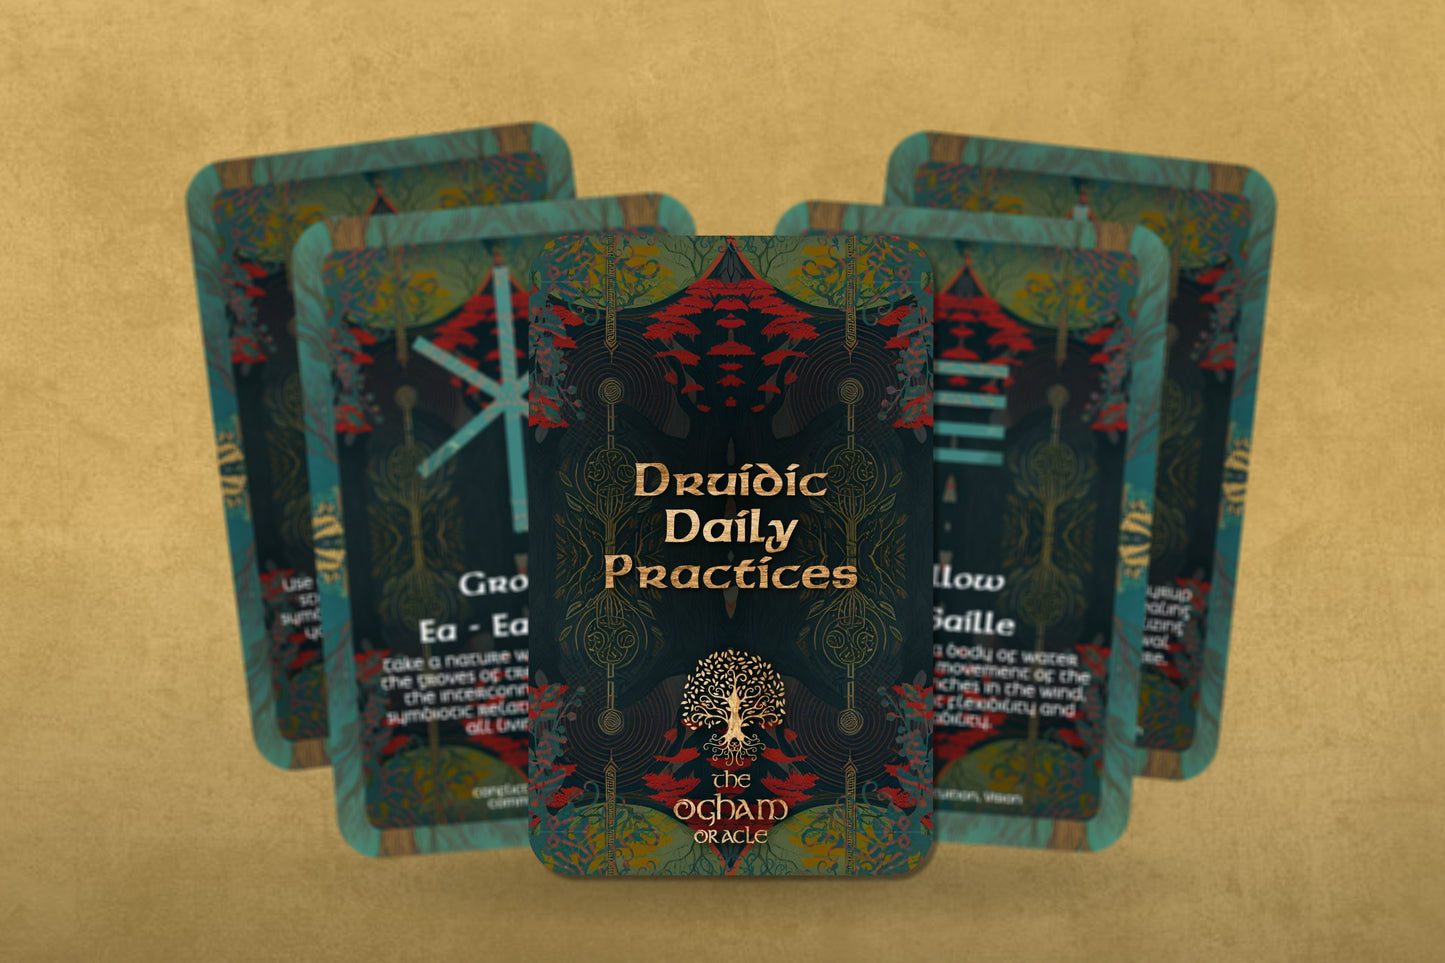 Druids Daily Practices - The Ogham Oracle